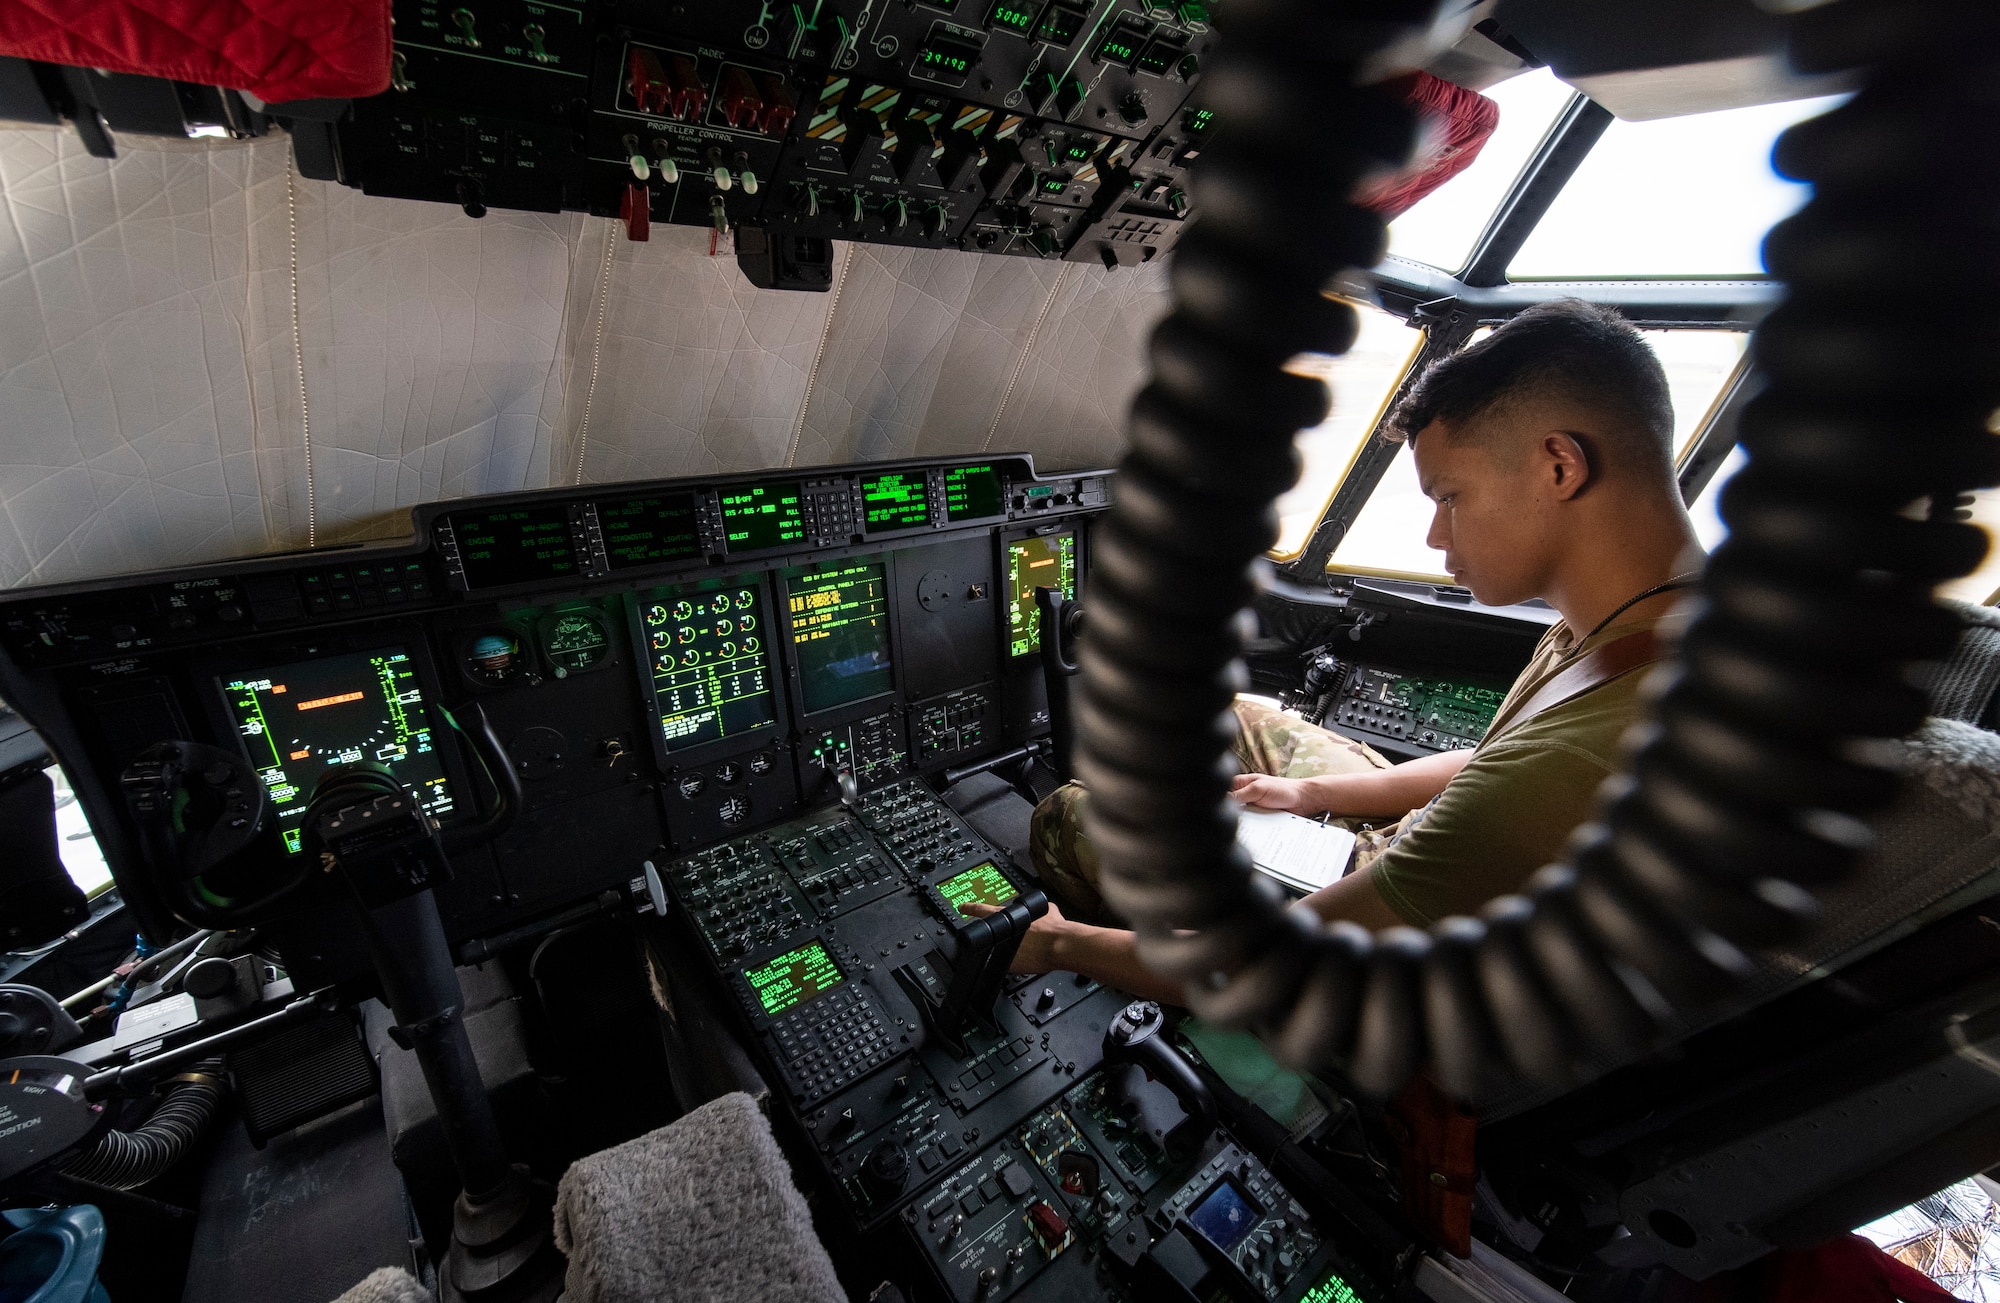 A U.S. Air Force 75th Expeditionary Airlift Squadron (EAS) loadmaster reviews a checklist on a C-130J Super Hercules at Camp Lemonnier, Djibouti, June 28, 2020. The 75th EAS provides strategic airlift capabilities across the Combined Joint Task Force - Horn of Africa (CJTF-HOA) area of responsibility. (U.S. Air Force photo by Tech. Sgt. Christopher Ruano)